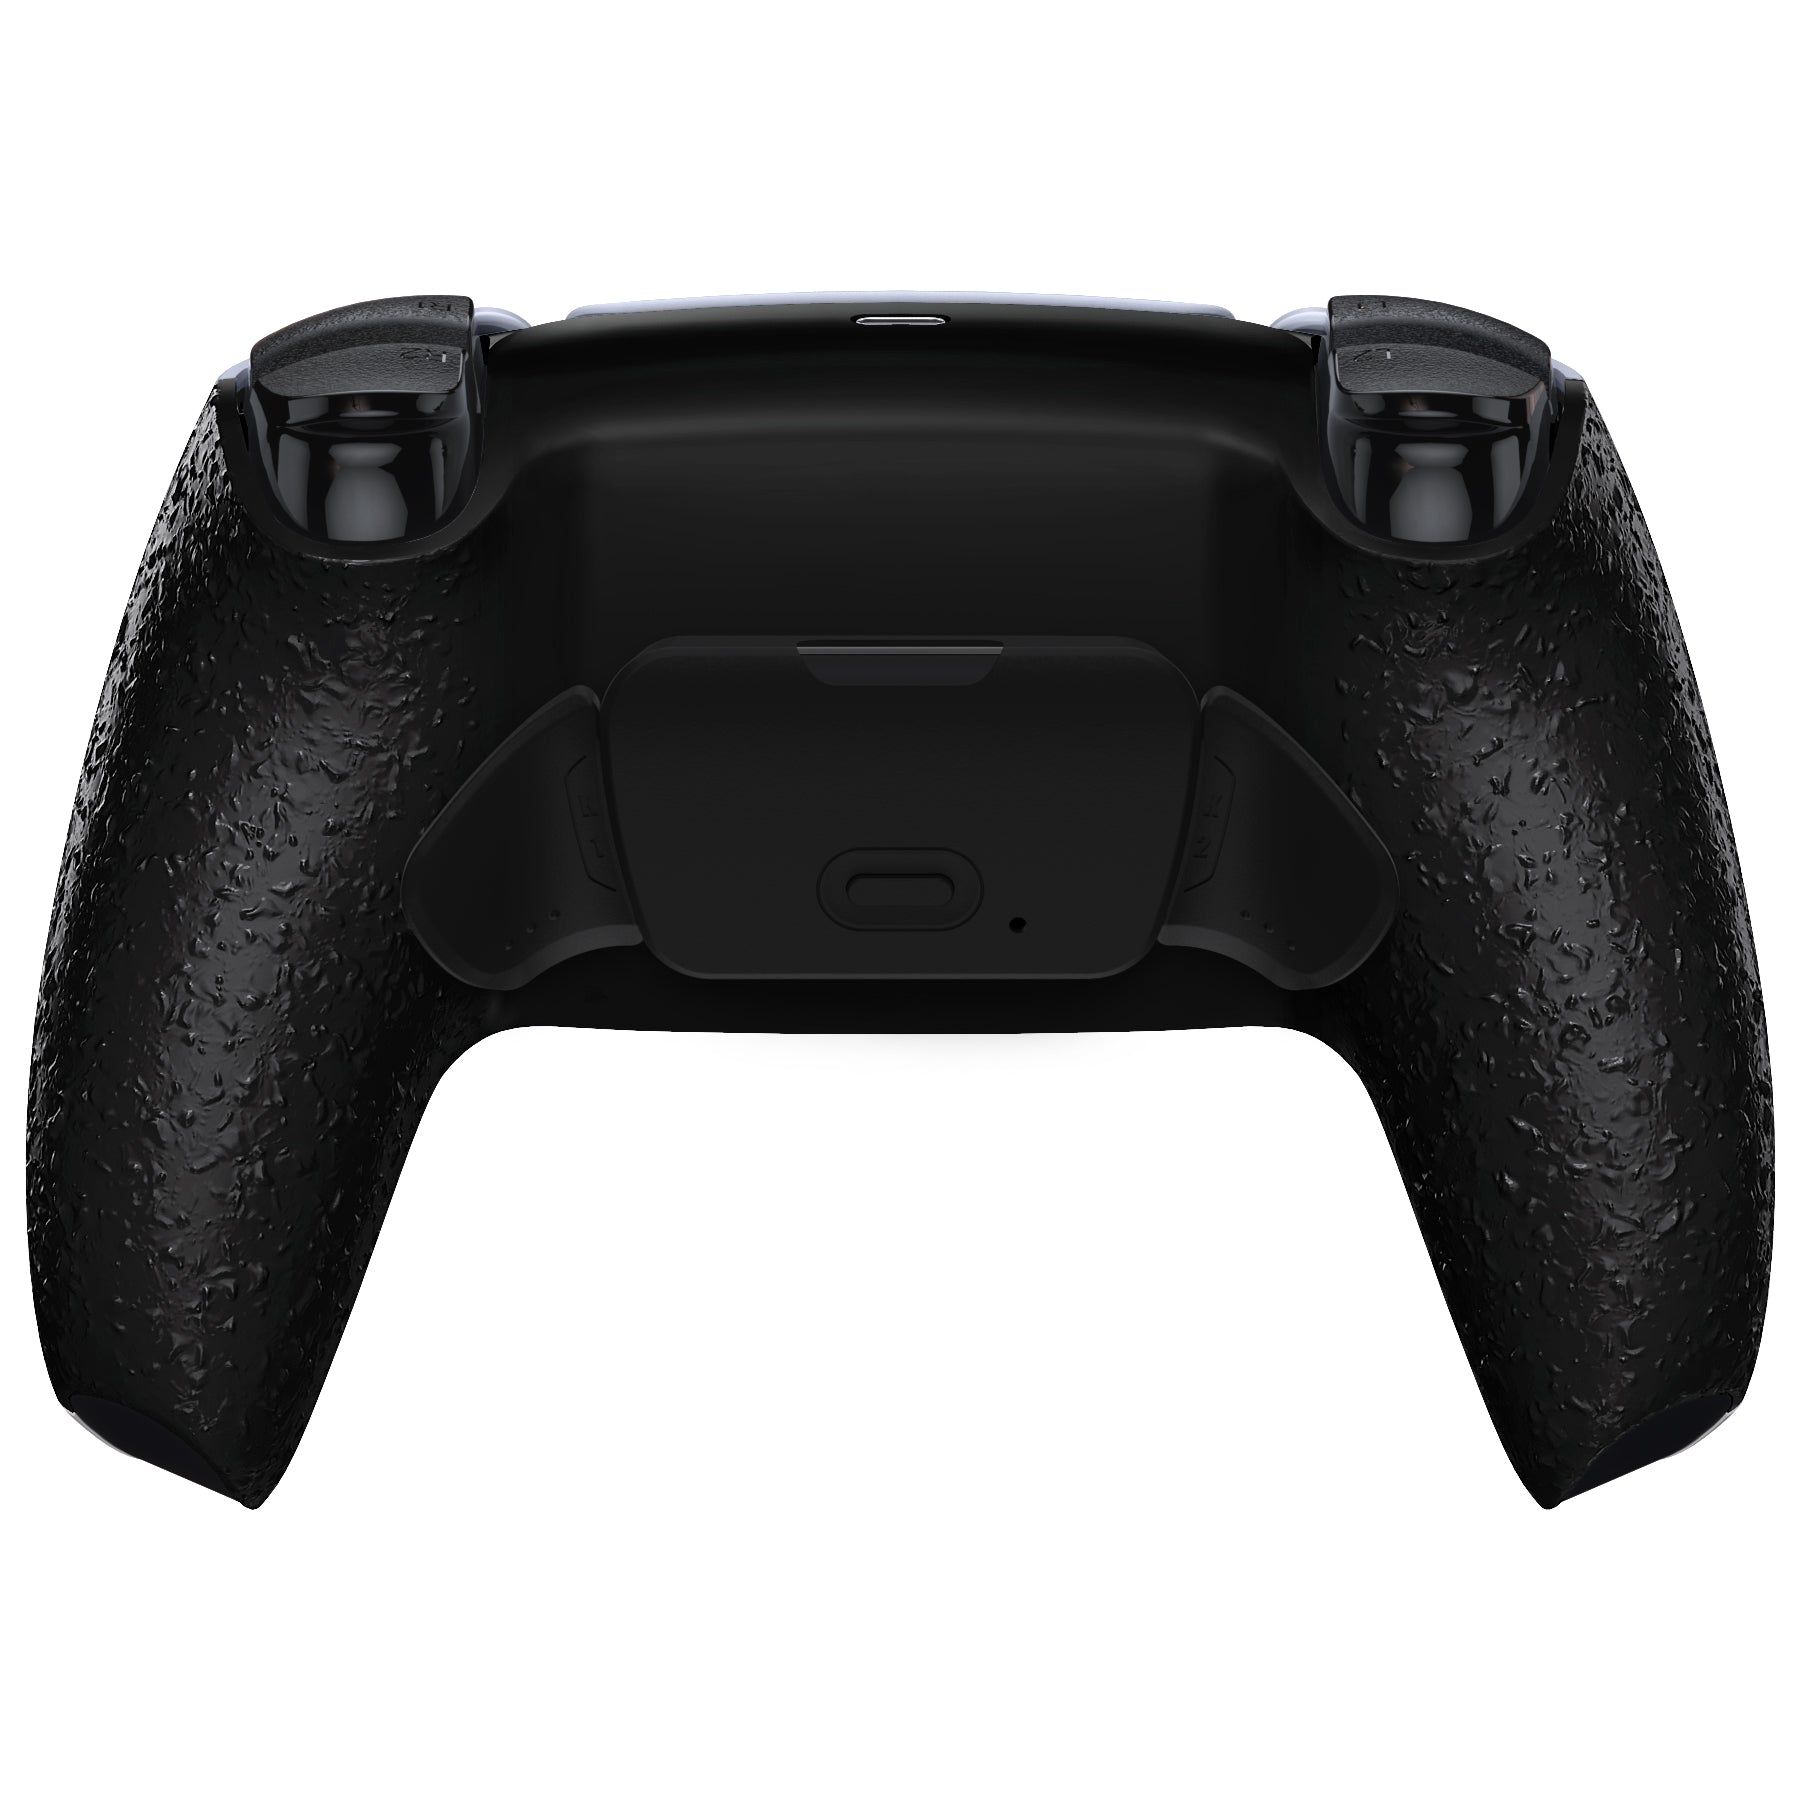 eXtremeRate Retail Textured Black Back Paddles Remappable Rise Remap Kit with Upgrade Board & Redesigned Back Shell & Back Buttons Attachment for ps5 Controller BDM-010 & BDM-020 - XPFP3040G2